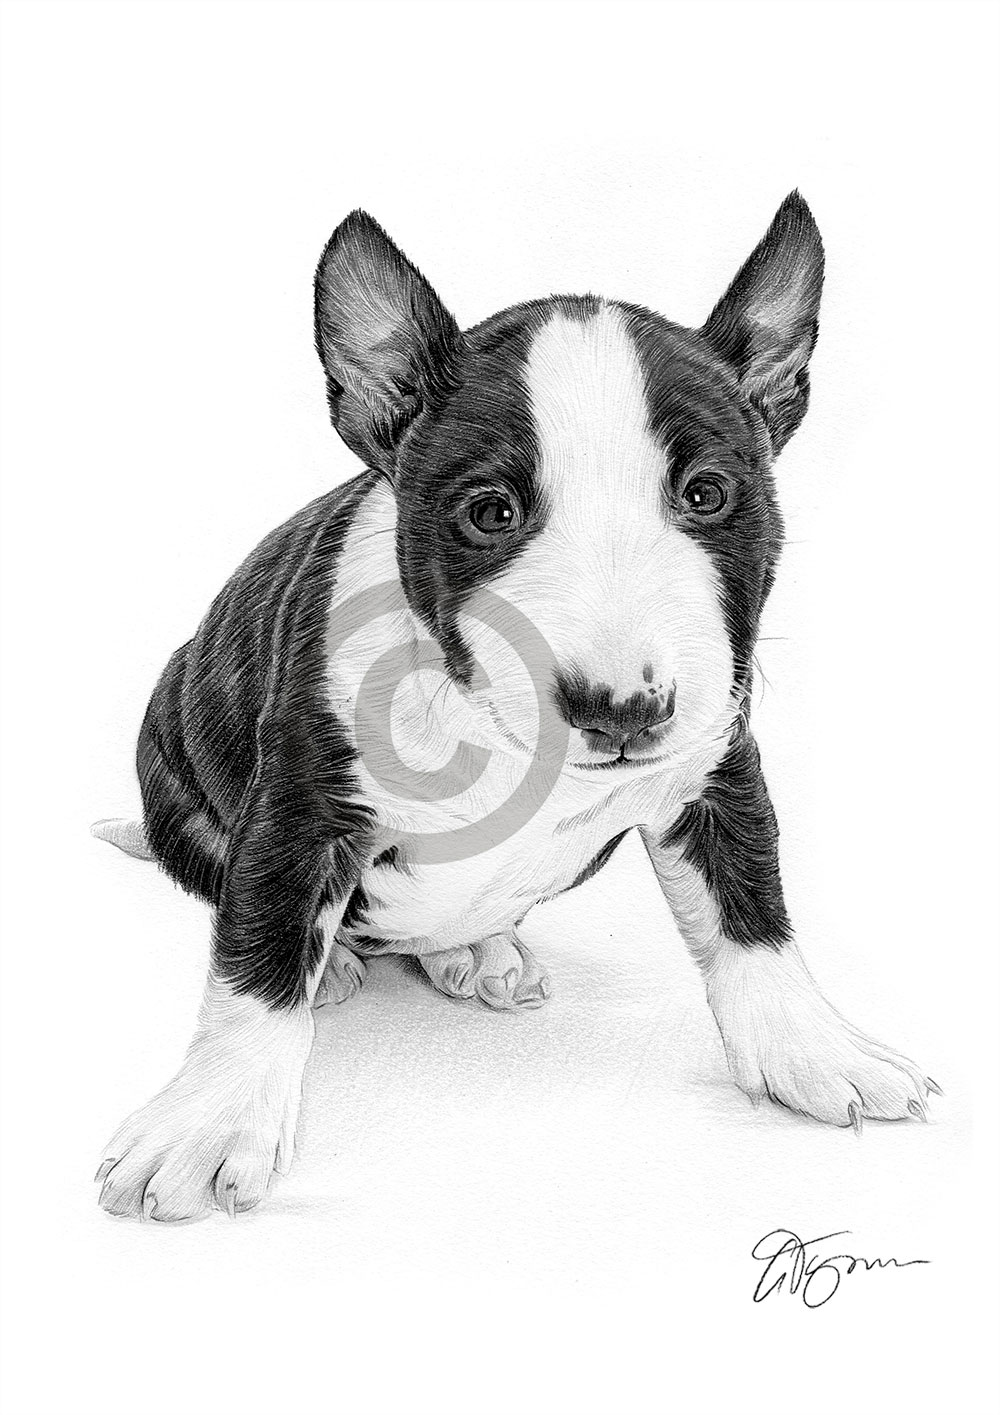 English Bull Terrier Puppy Dog Pencil Drawing Art Print A4 Size Signed Ebay